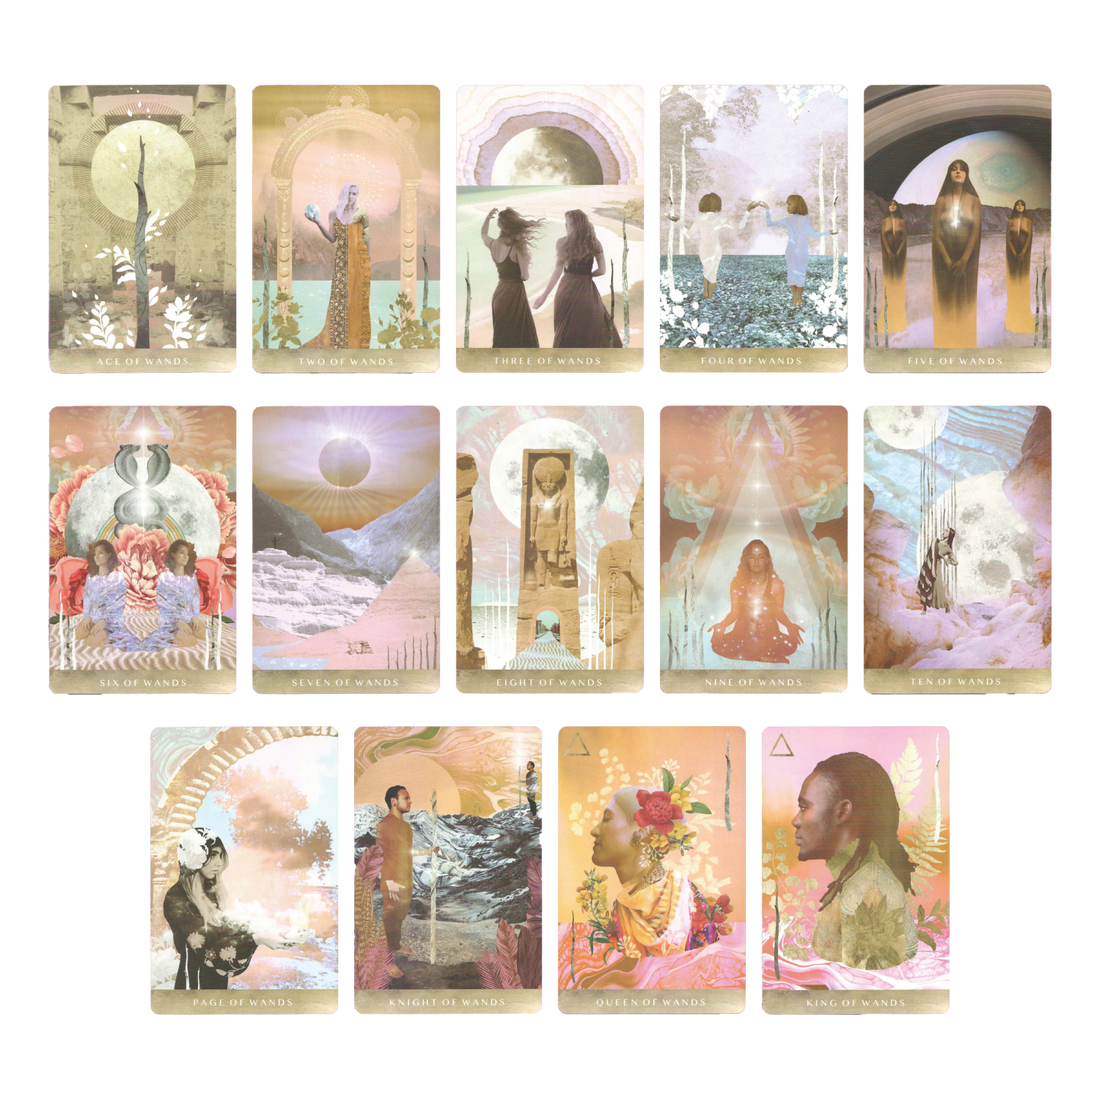 the moonchild tarot deck by danielle noel (Starseed Designs inc.) wands minor arcana cards